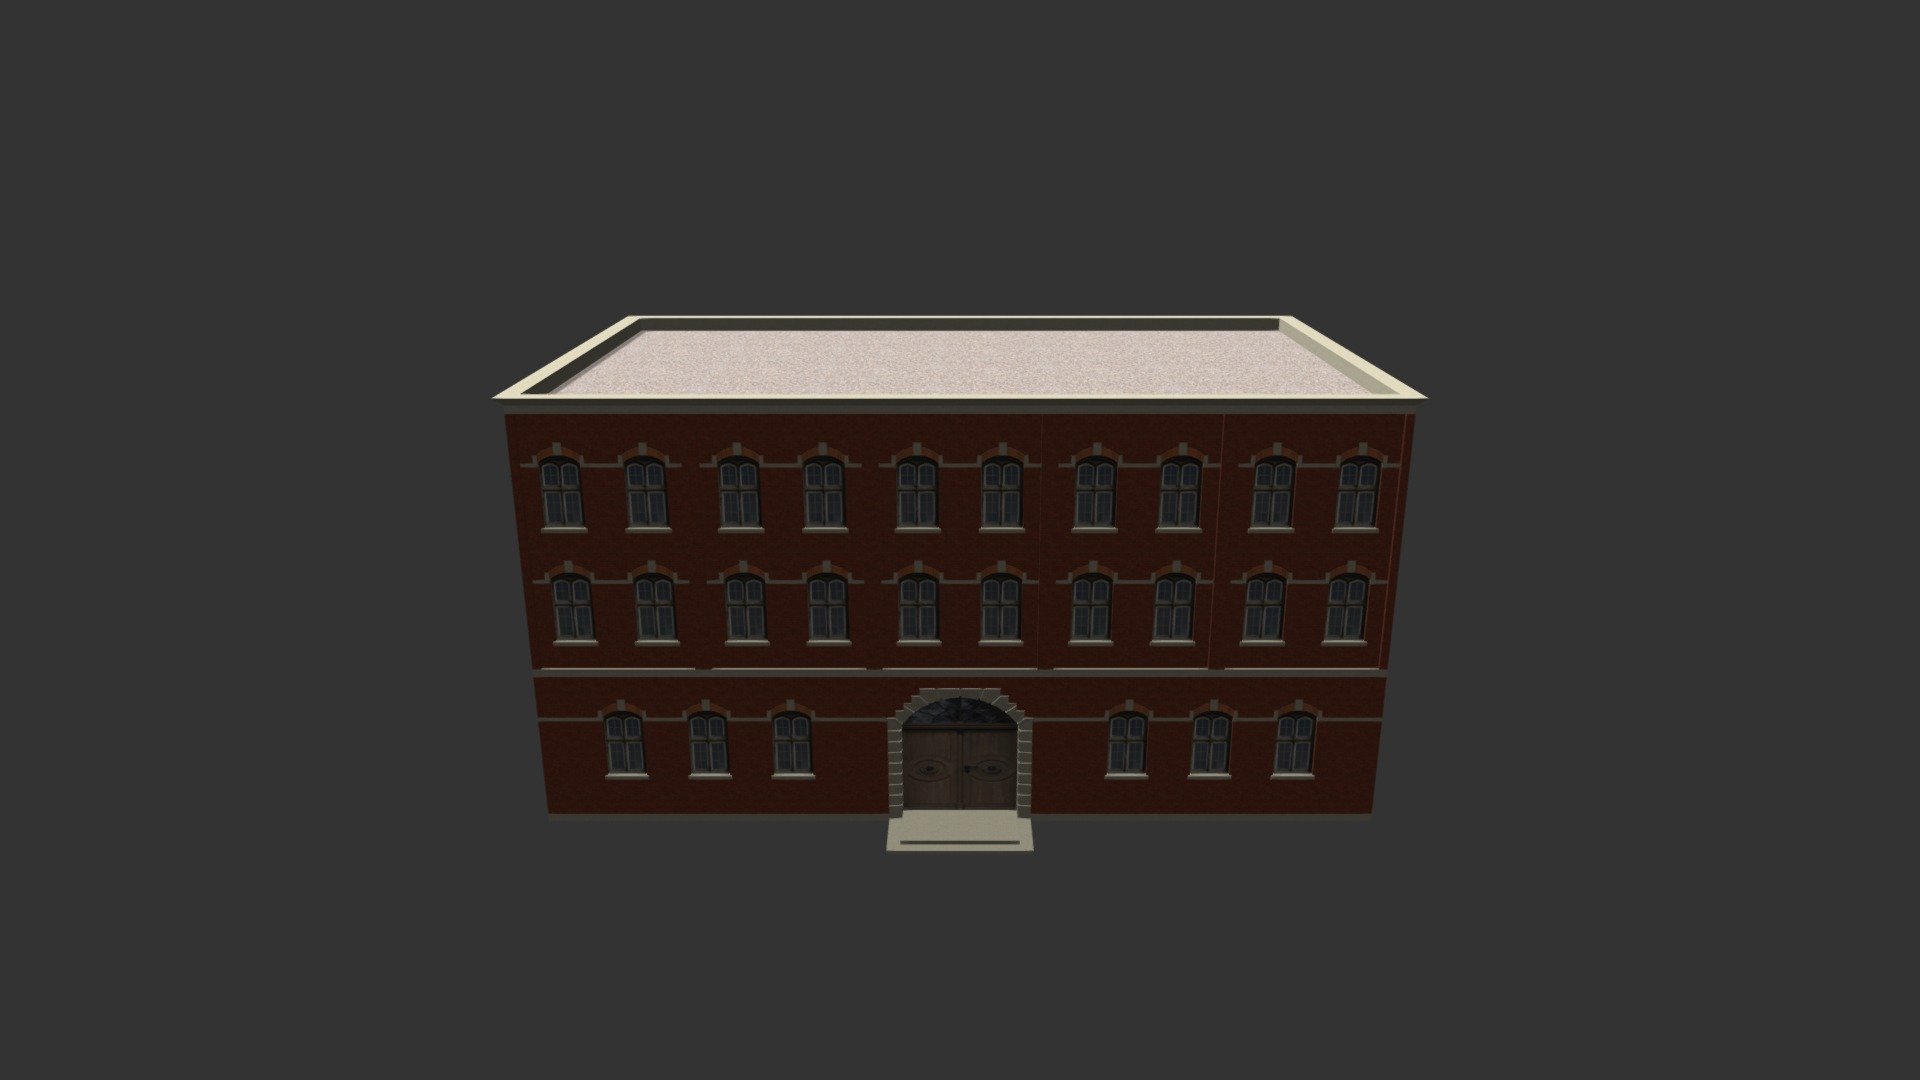 Factory Building 04
A low-poly 3d model ready for Virtual Reality (VR), Augmented Reality (AR), games and other real-time apps.

This model is based on a real life building and uses 9982 triangles (5589 polygons) and 4 materials.

Scaled to a default scale of 1 unit = 1 meter

This set comes with :

Model files in 3DS format files (.3ds) 
Model files in FBX format files (.fbx) 
Model files in OBJ format files (.obj &amp; .mtl) 

Textures : 
Diffuse Maps 
Normal Maps

All Textures are preloaded on the materials and prefabs so this prop is ready to be dropped in to any of your scenes.

Optimised for game engines but can also be used in any 3d package 3d model